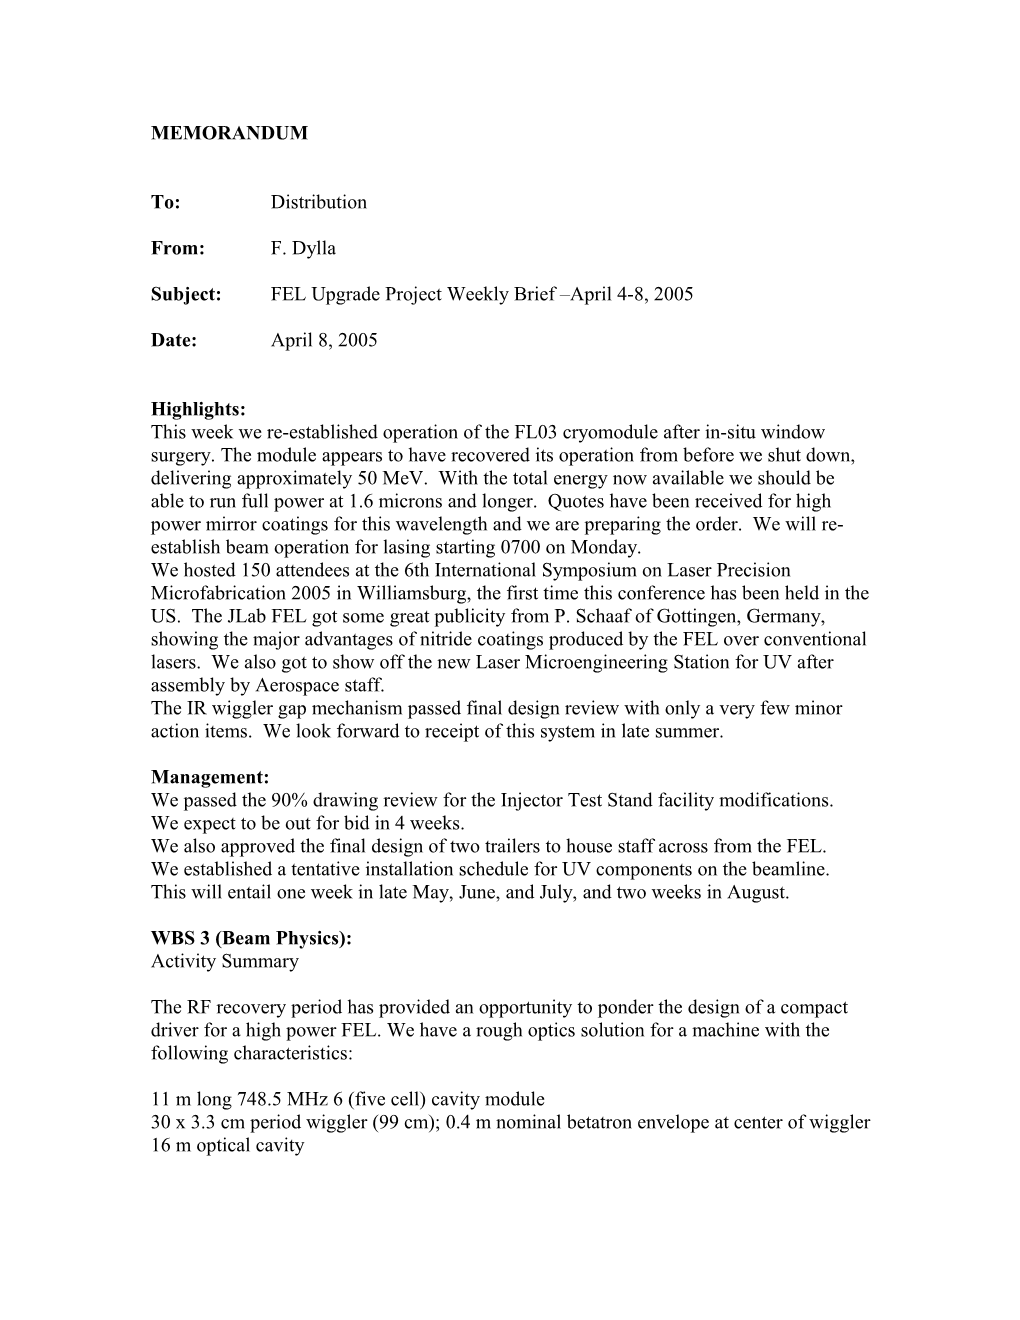 Subject:FEL Upgrade Project Weekly Brief April 4-8, 2005